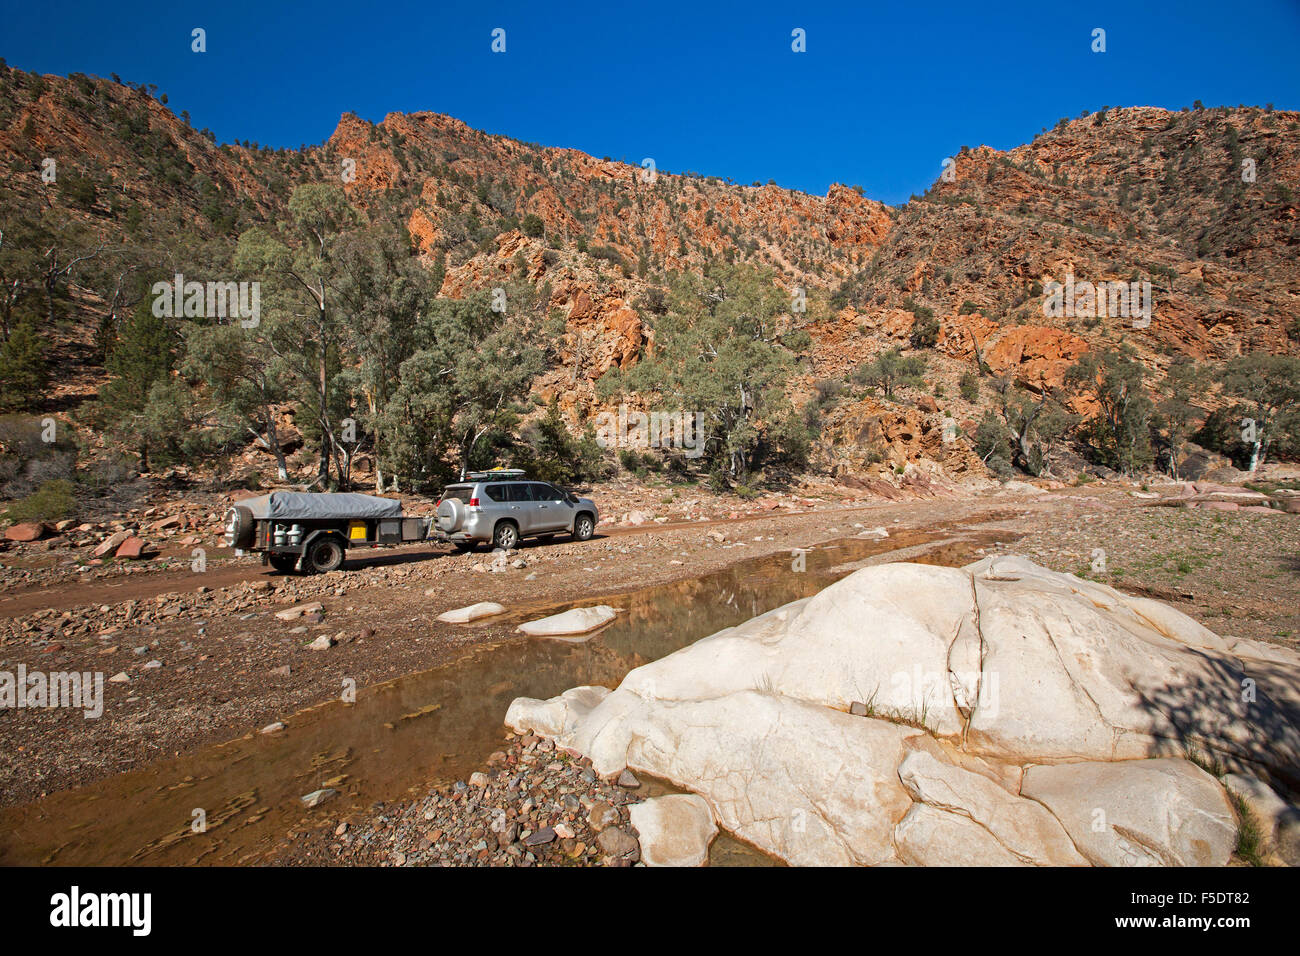 Four wheel drive vehicle towing camper trailer on road through rugged red hills of Flinders Ranges in outback Australia Stock Photo